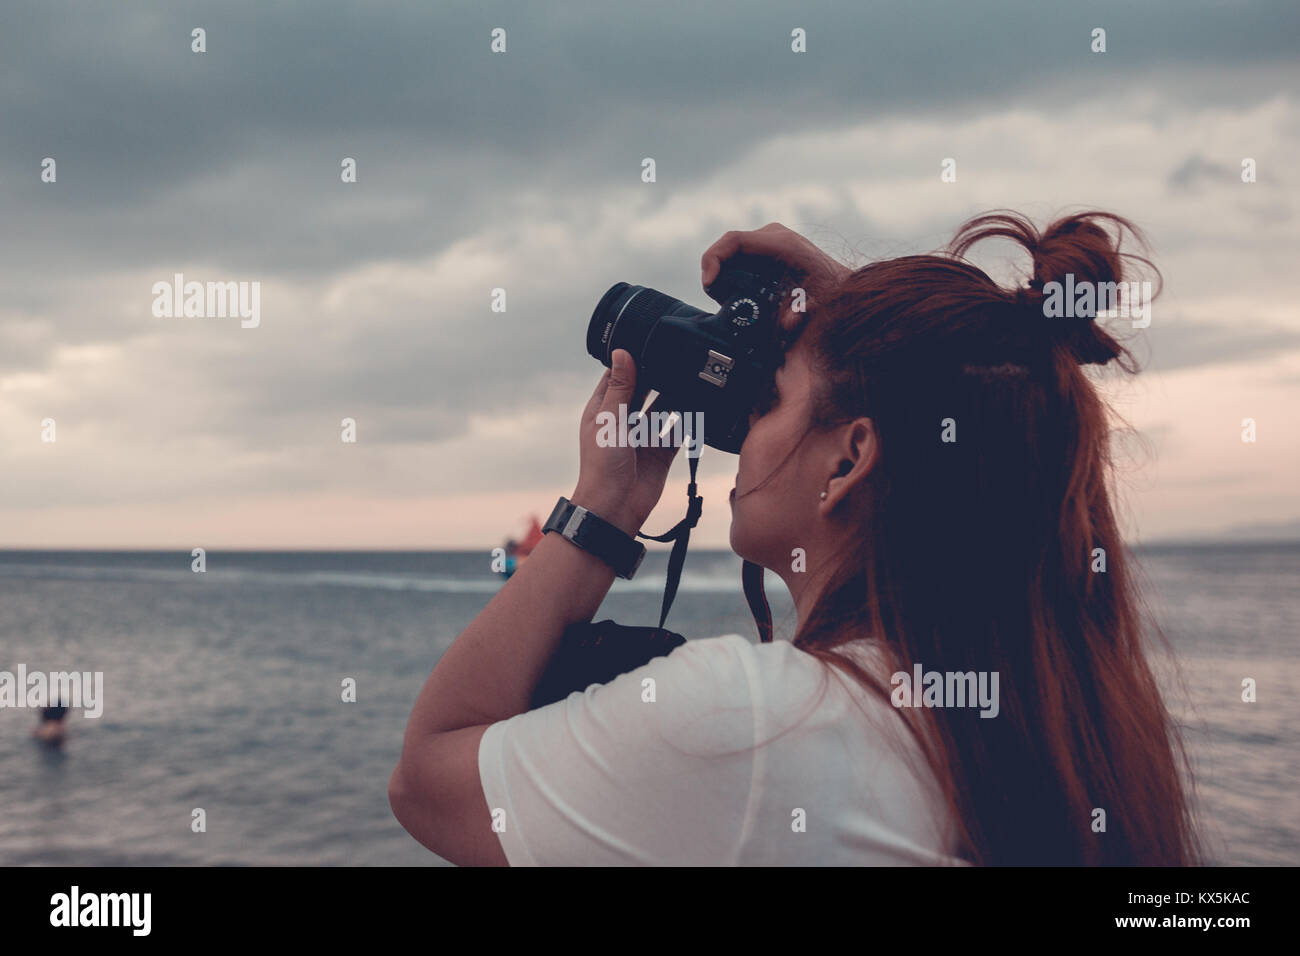 Girl Holding A Camera Taking A Shot At The Sky Stock Photo Alamy